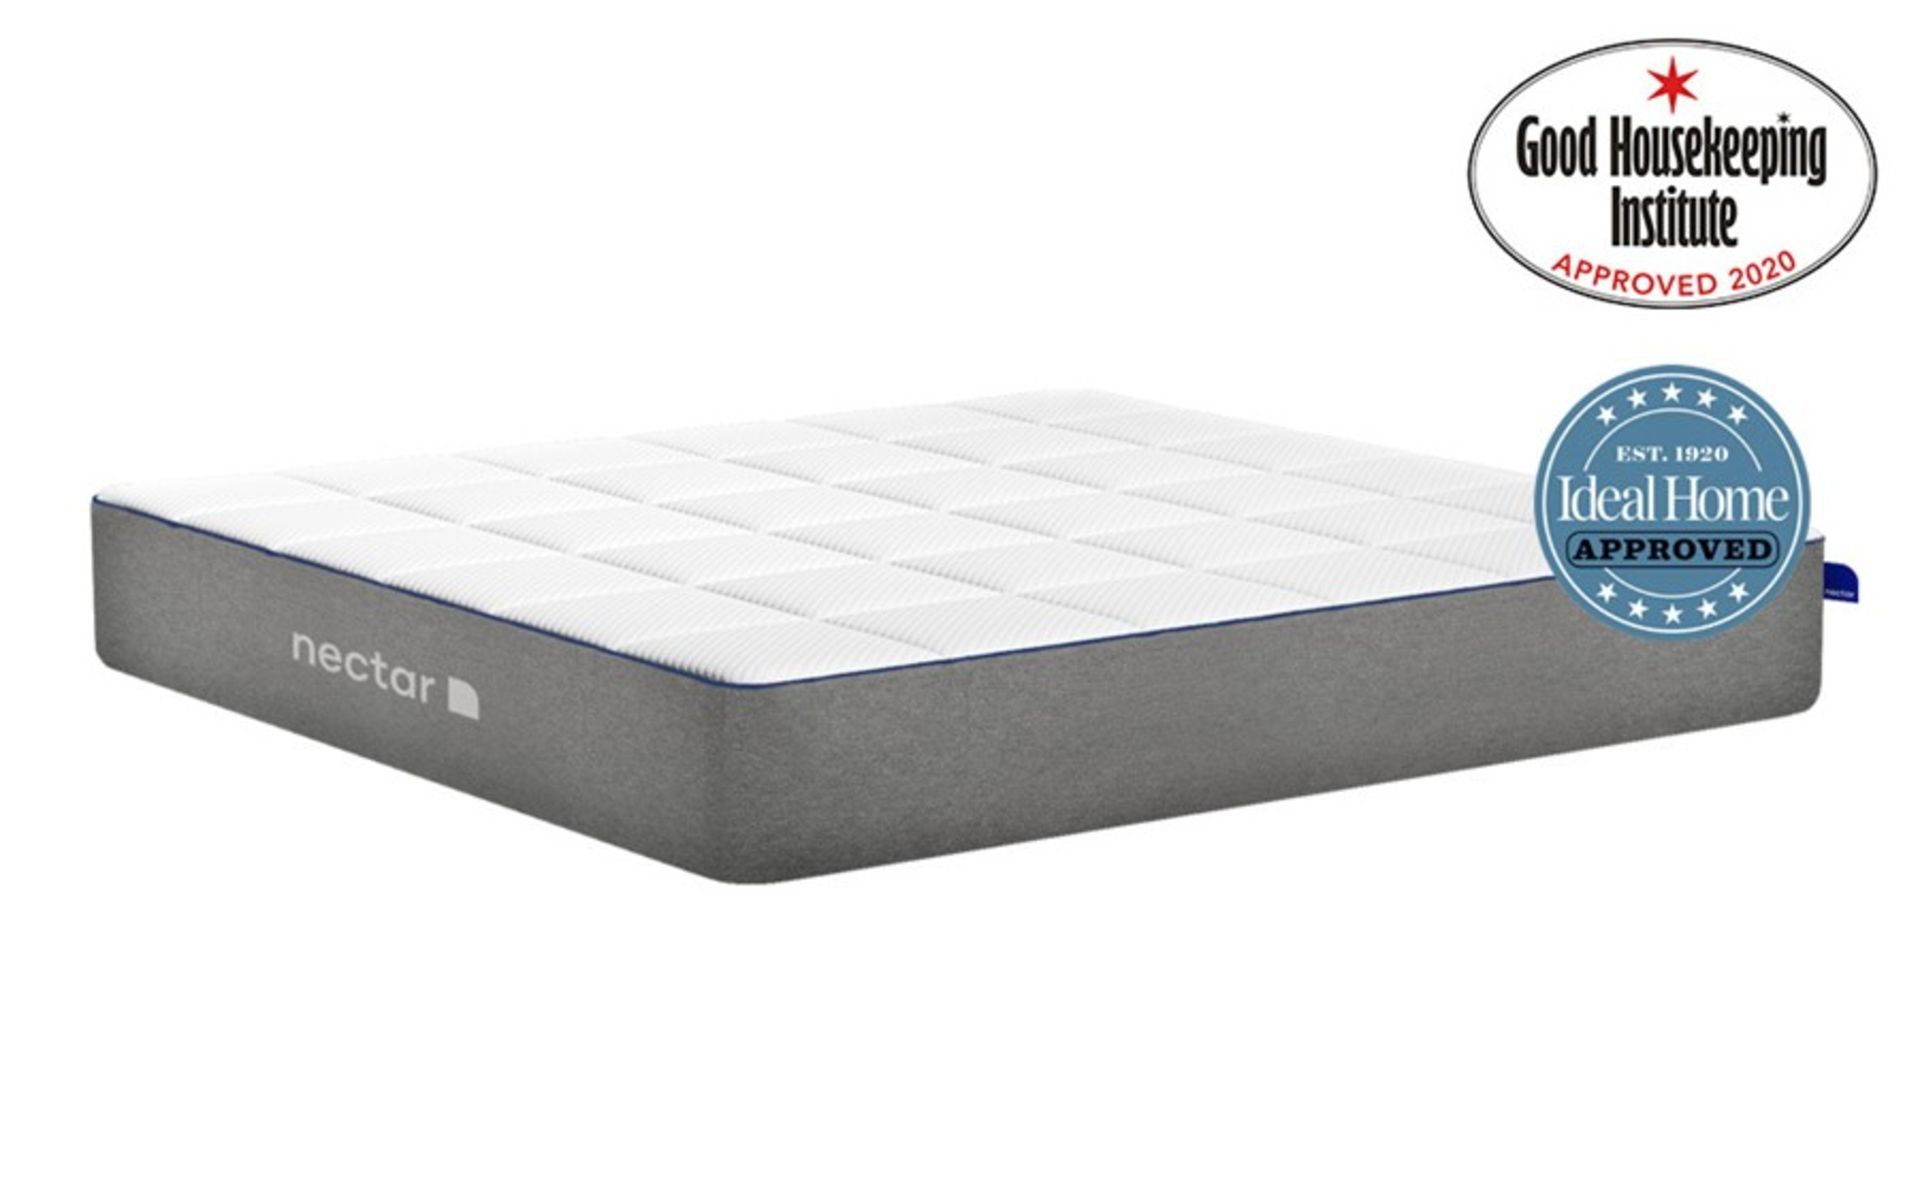 Nectar Professionally Refurbished Smart Pressure Relieving Single size Memory Foam Mattress, This